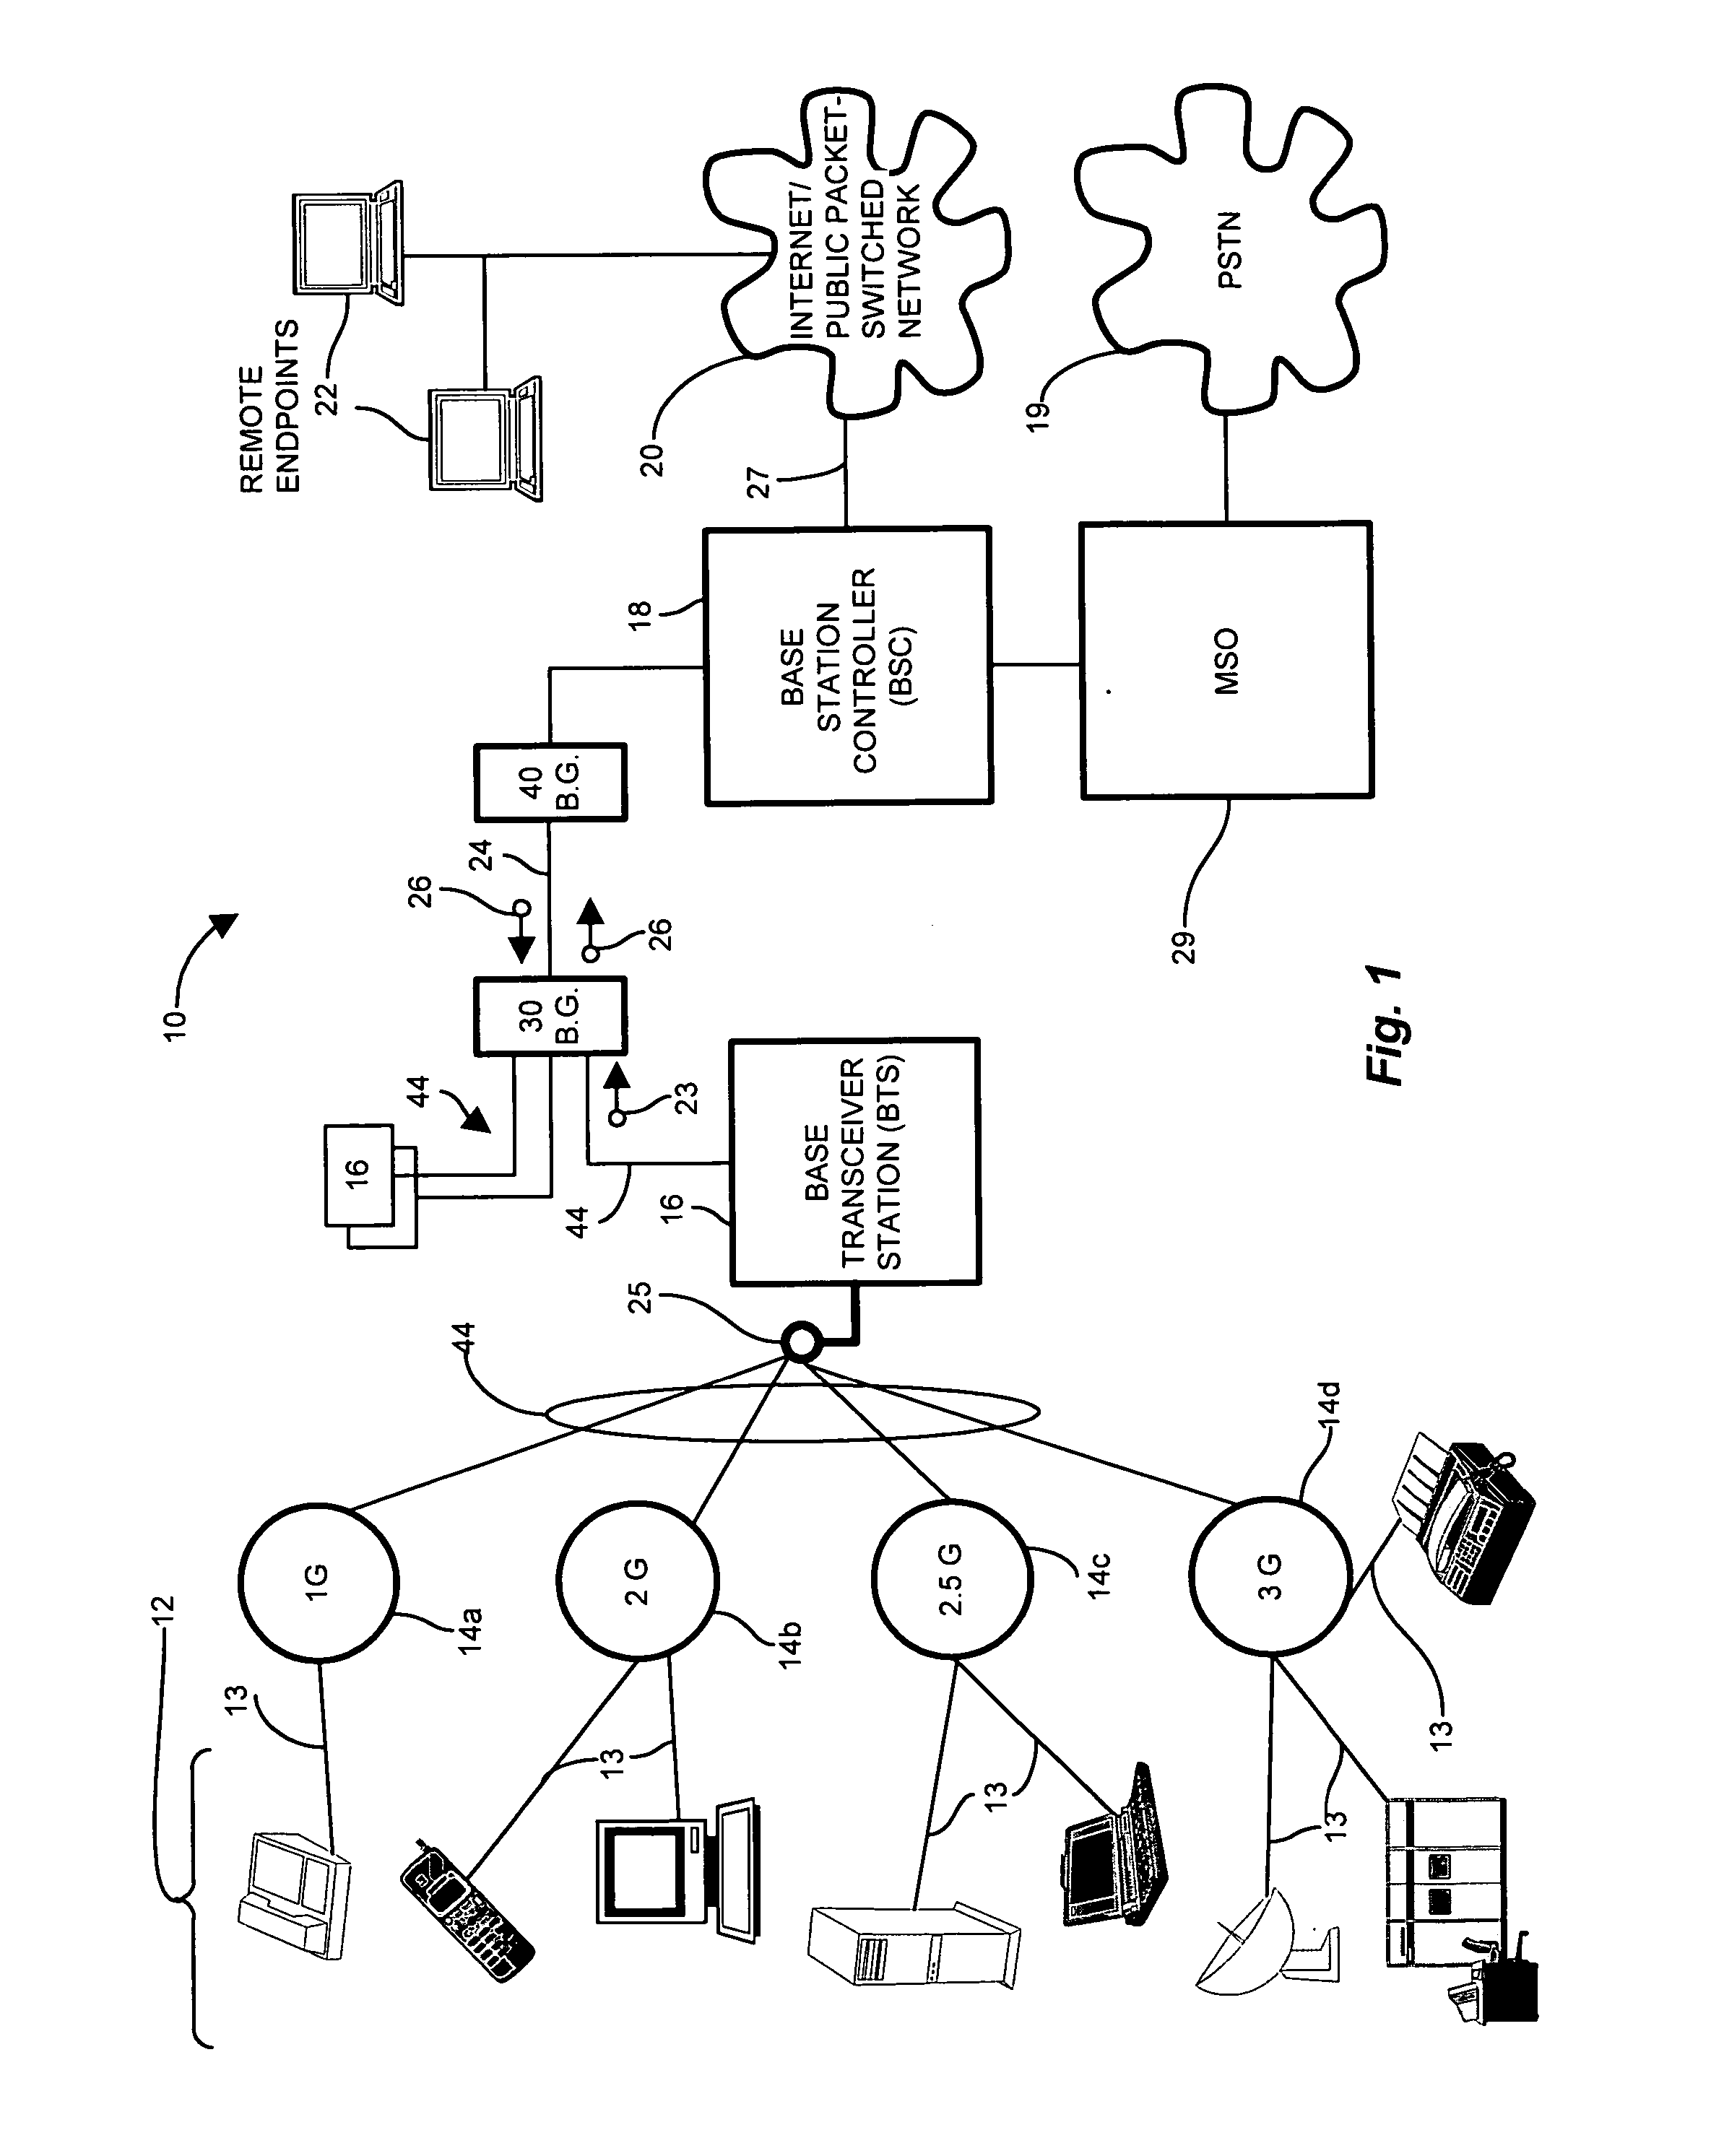 Methods and apparatus for low latency signal aggregation and bandwidth reduction